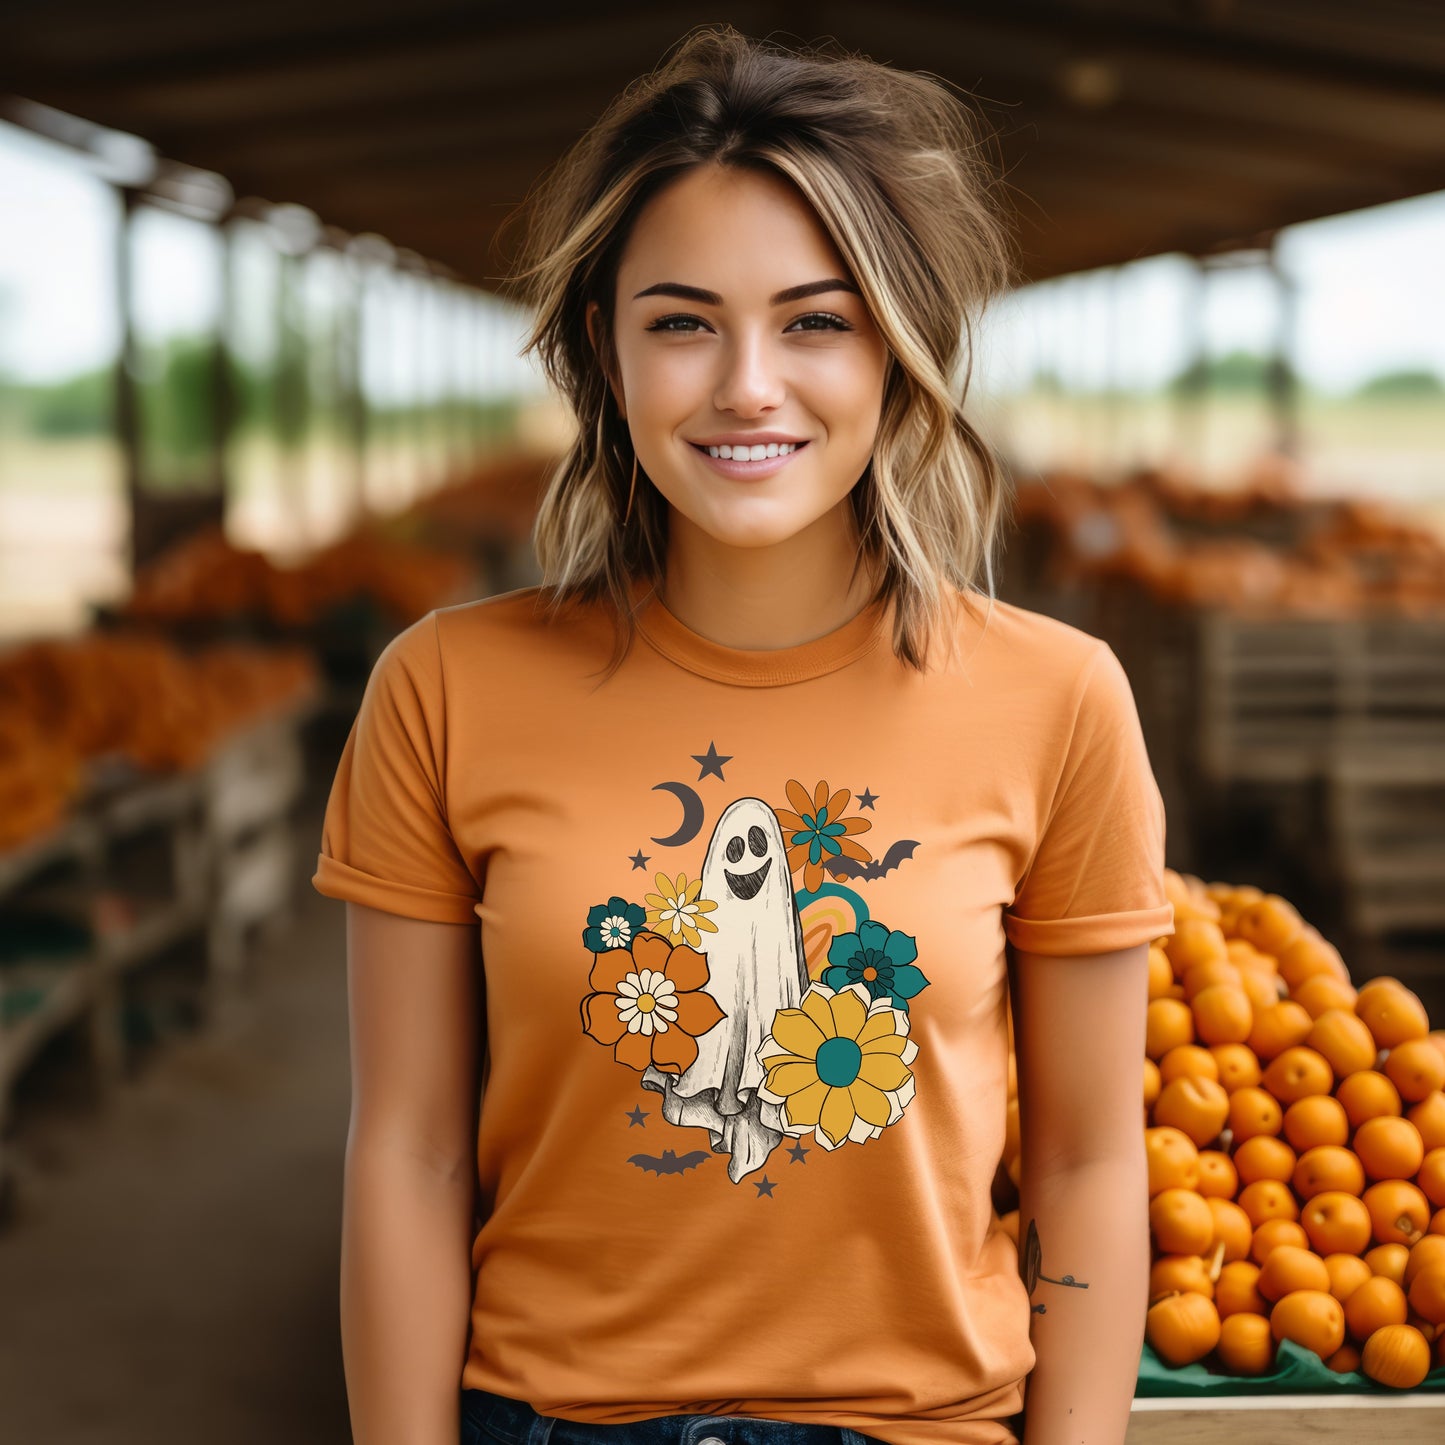 Burnt Orange T-Shirt with Retro Floral Ghost Image